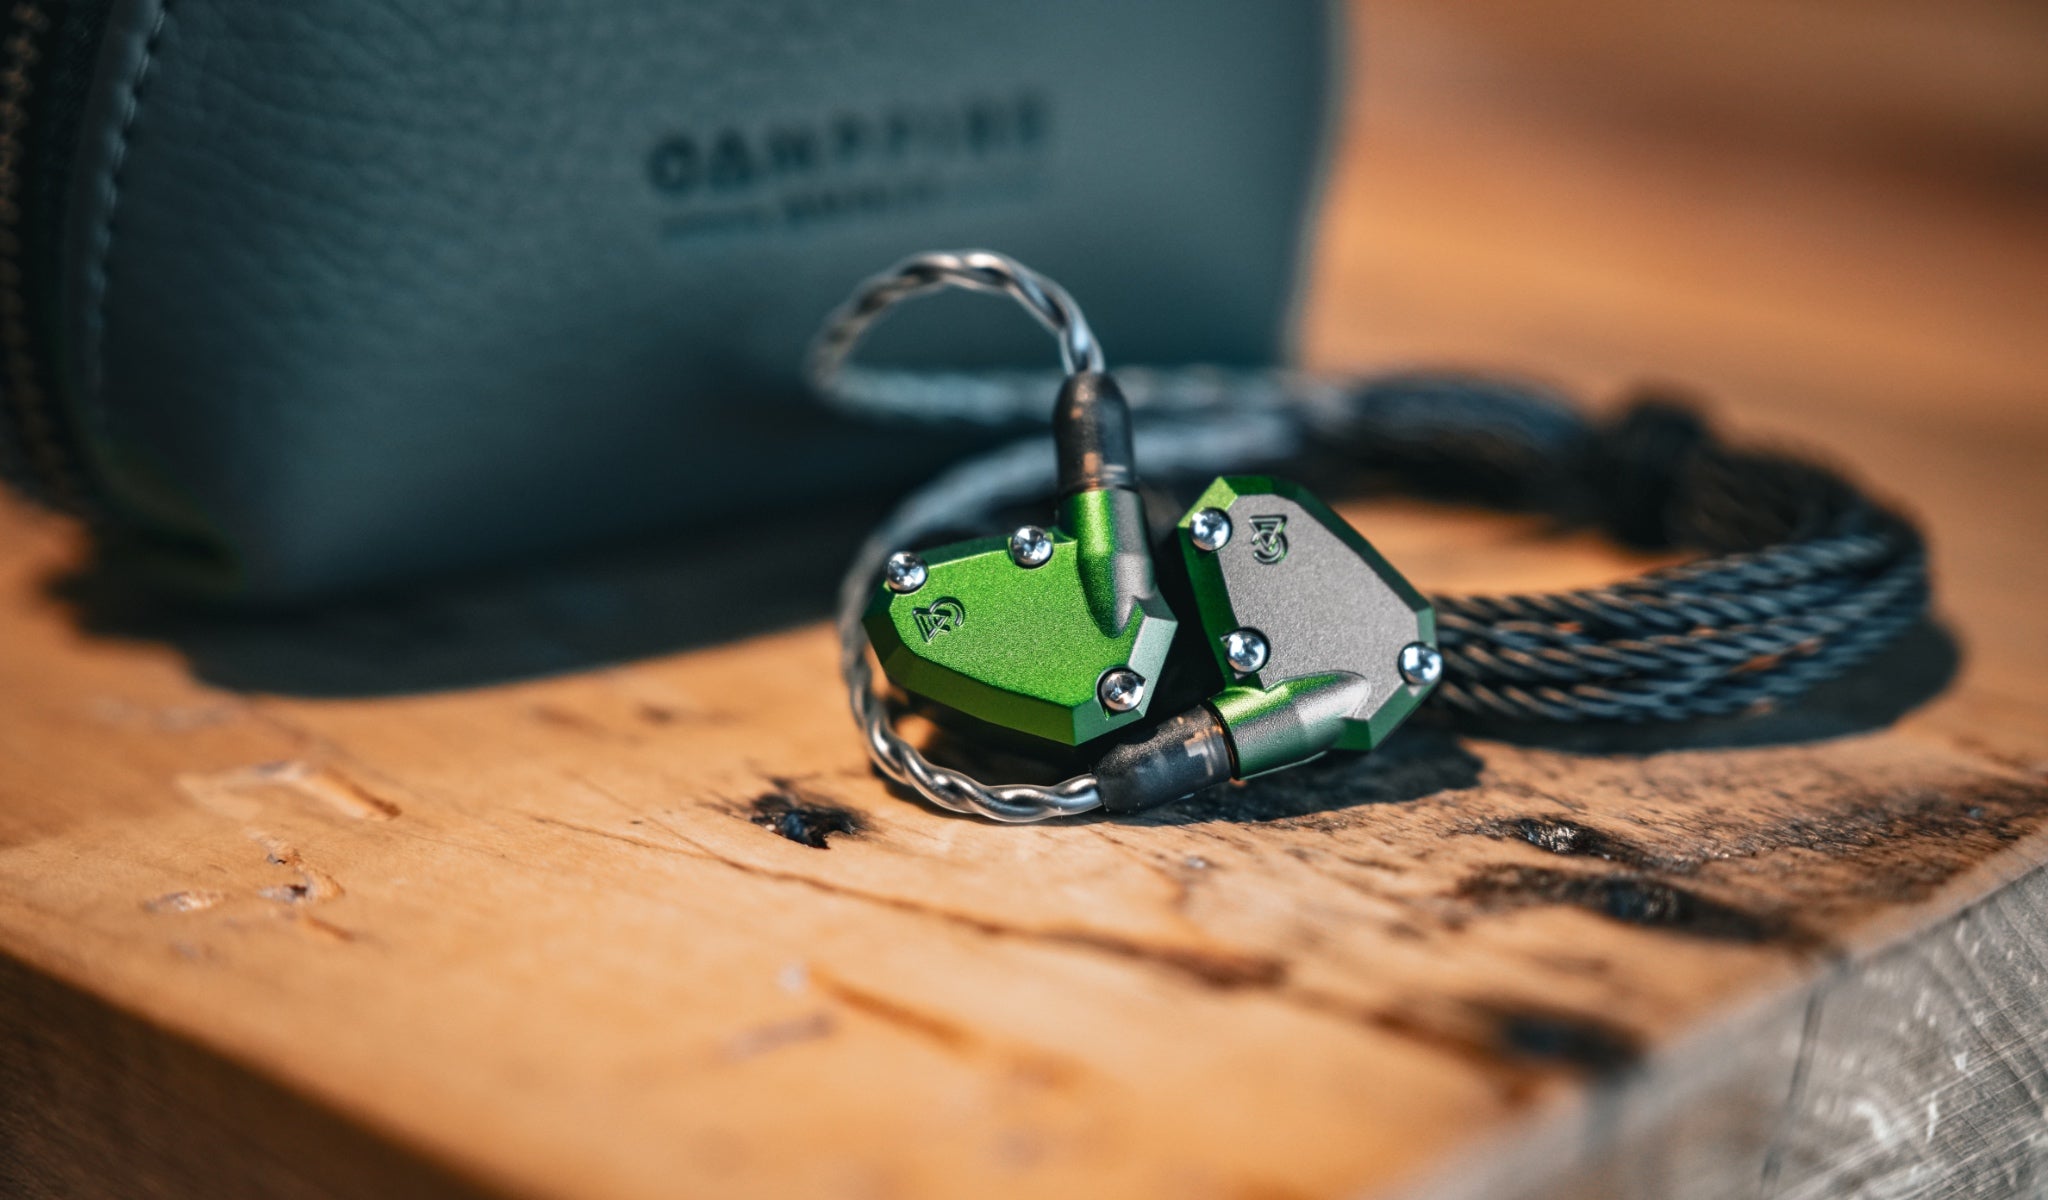 Campfire Audio Andromeda 2019 with attached stock cable and green case on butcher block table from Bloom Audio gallery